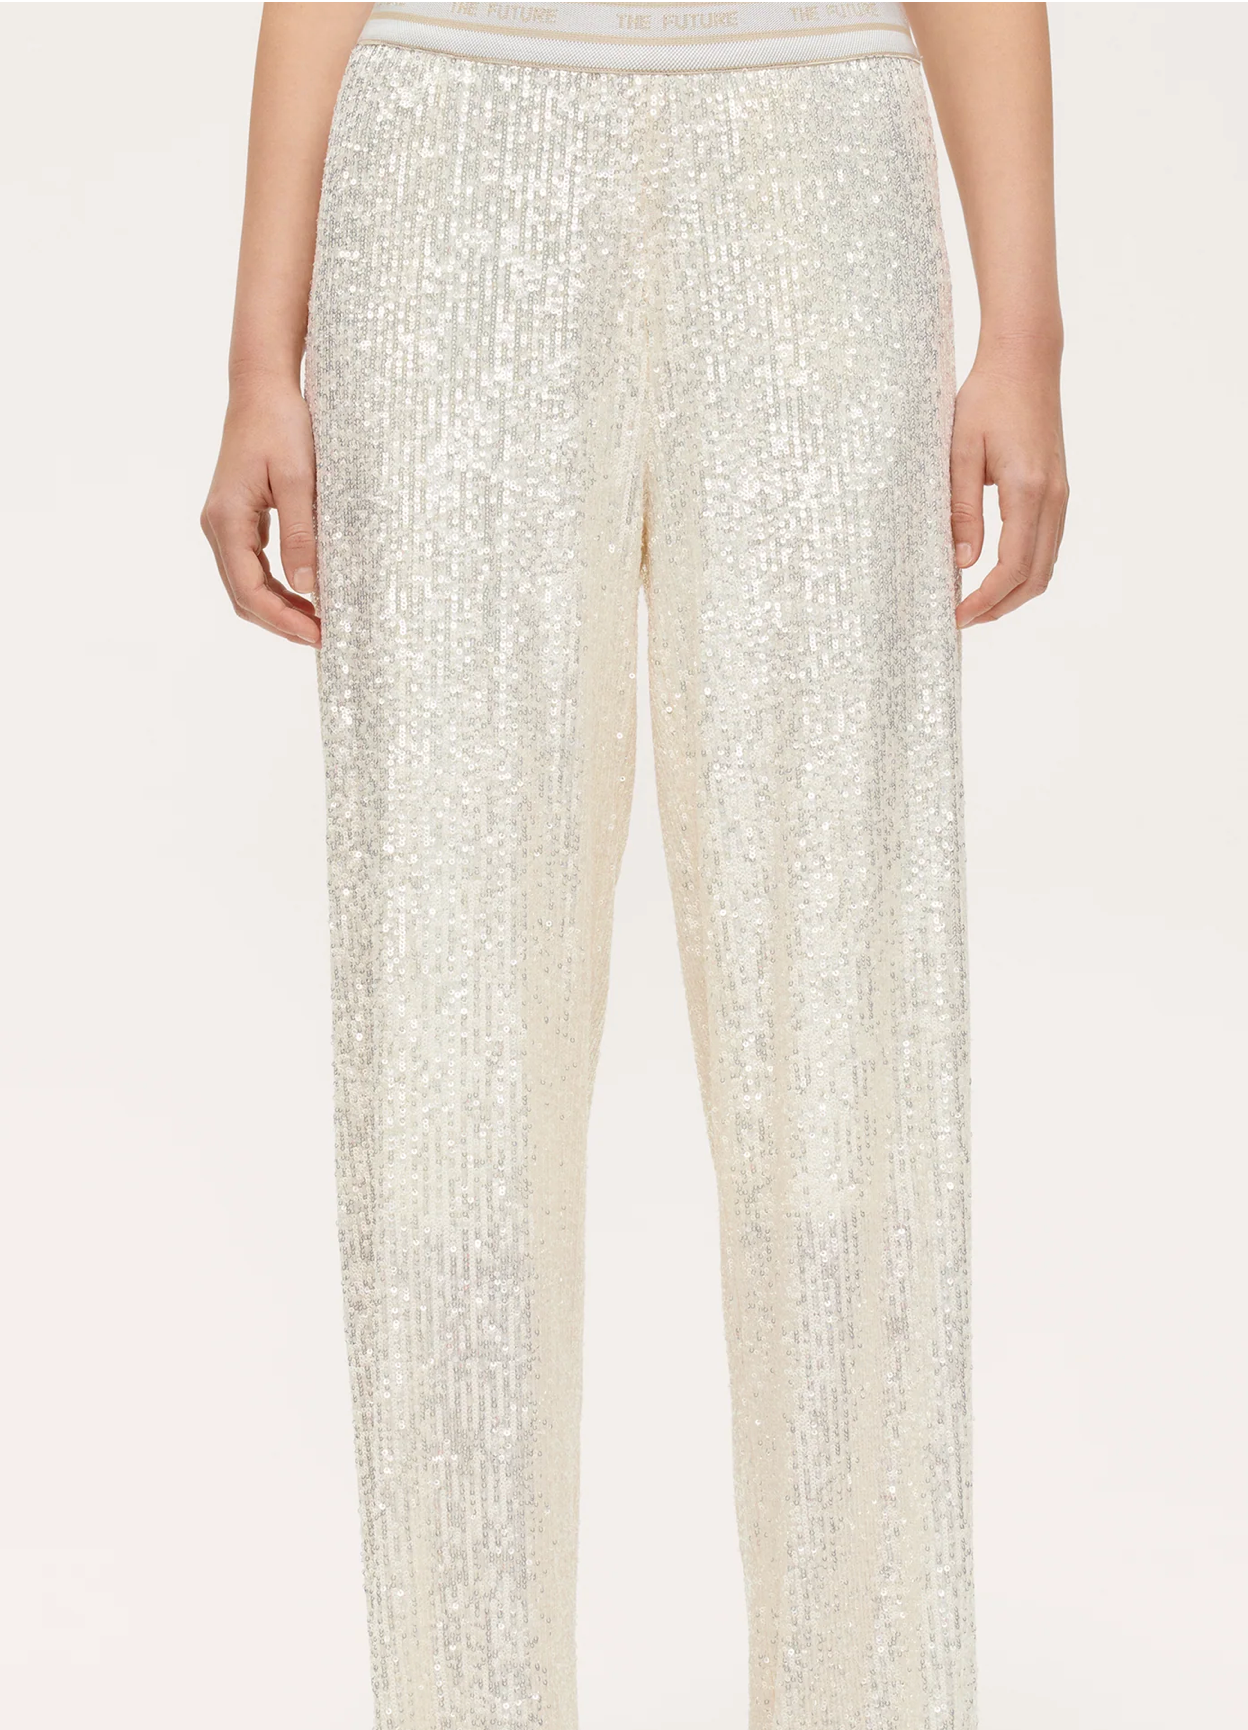 ALICE SEQUIN PANT - OFF WHITE-CAMBIO-FLOW by nicole